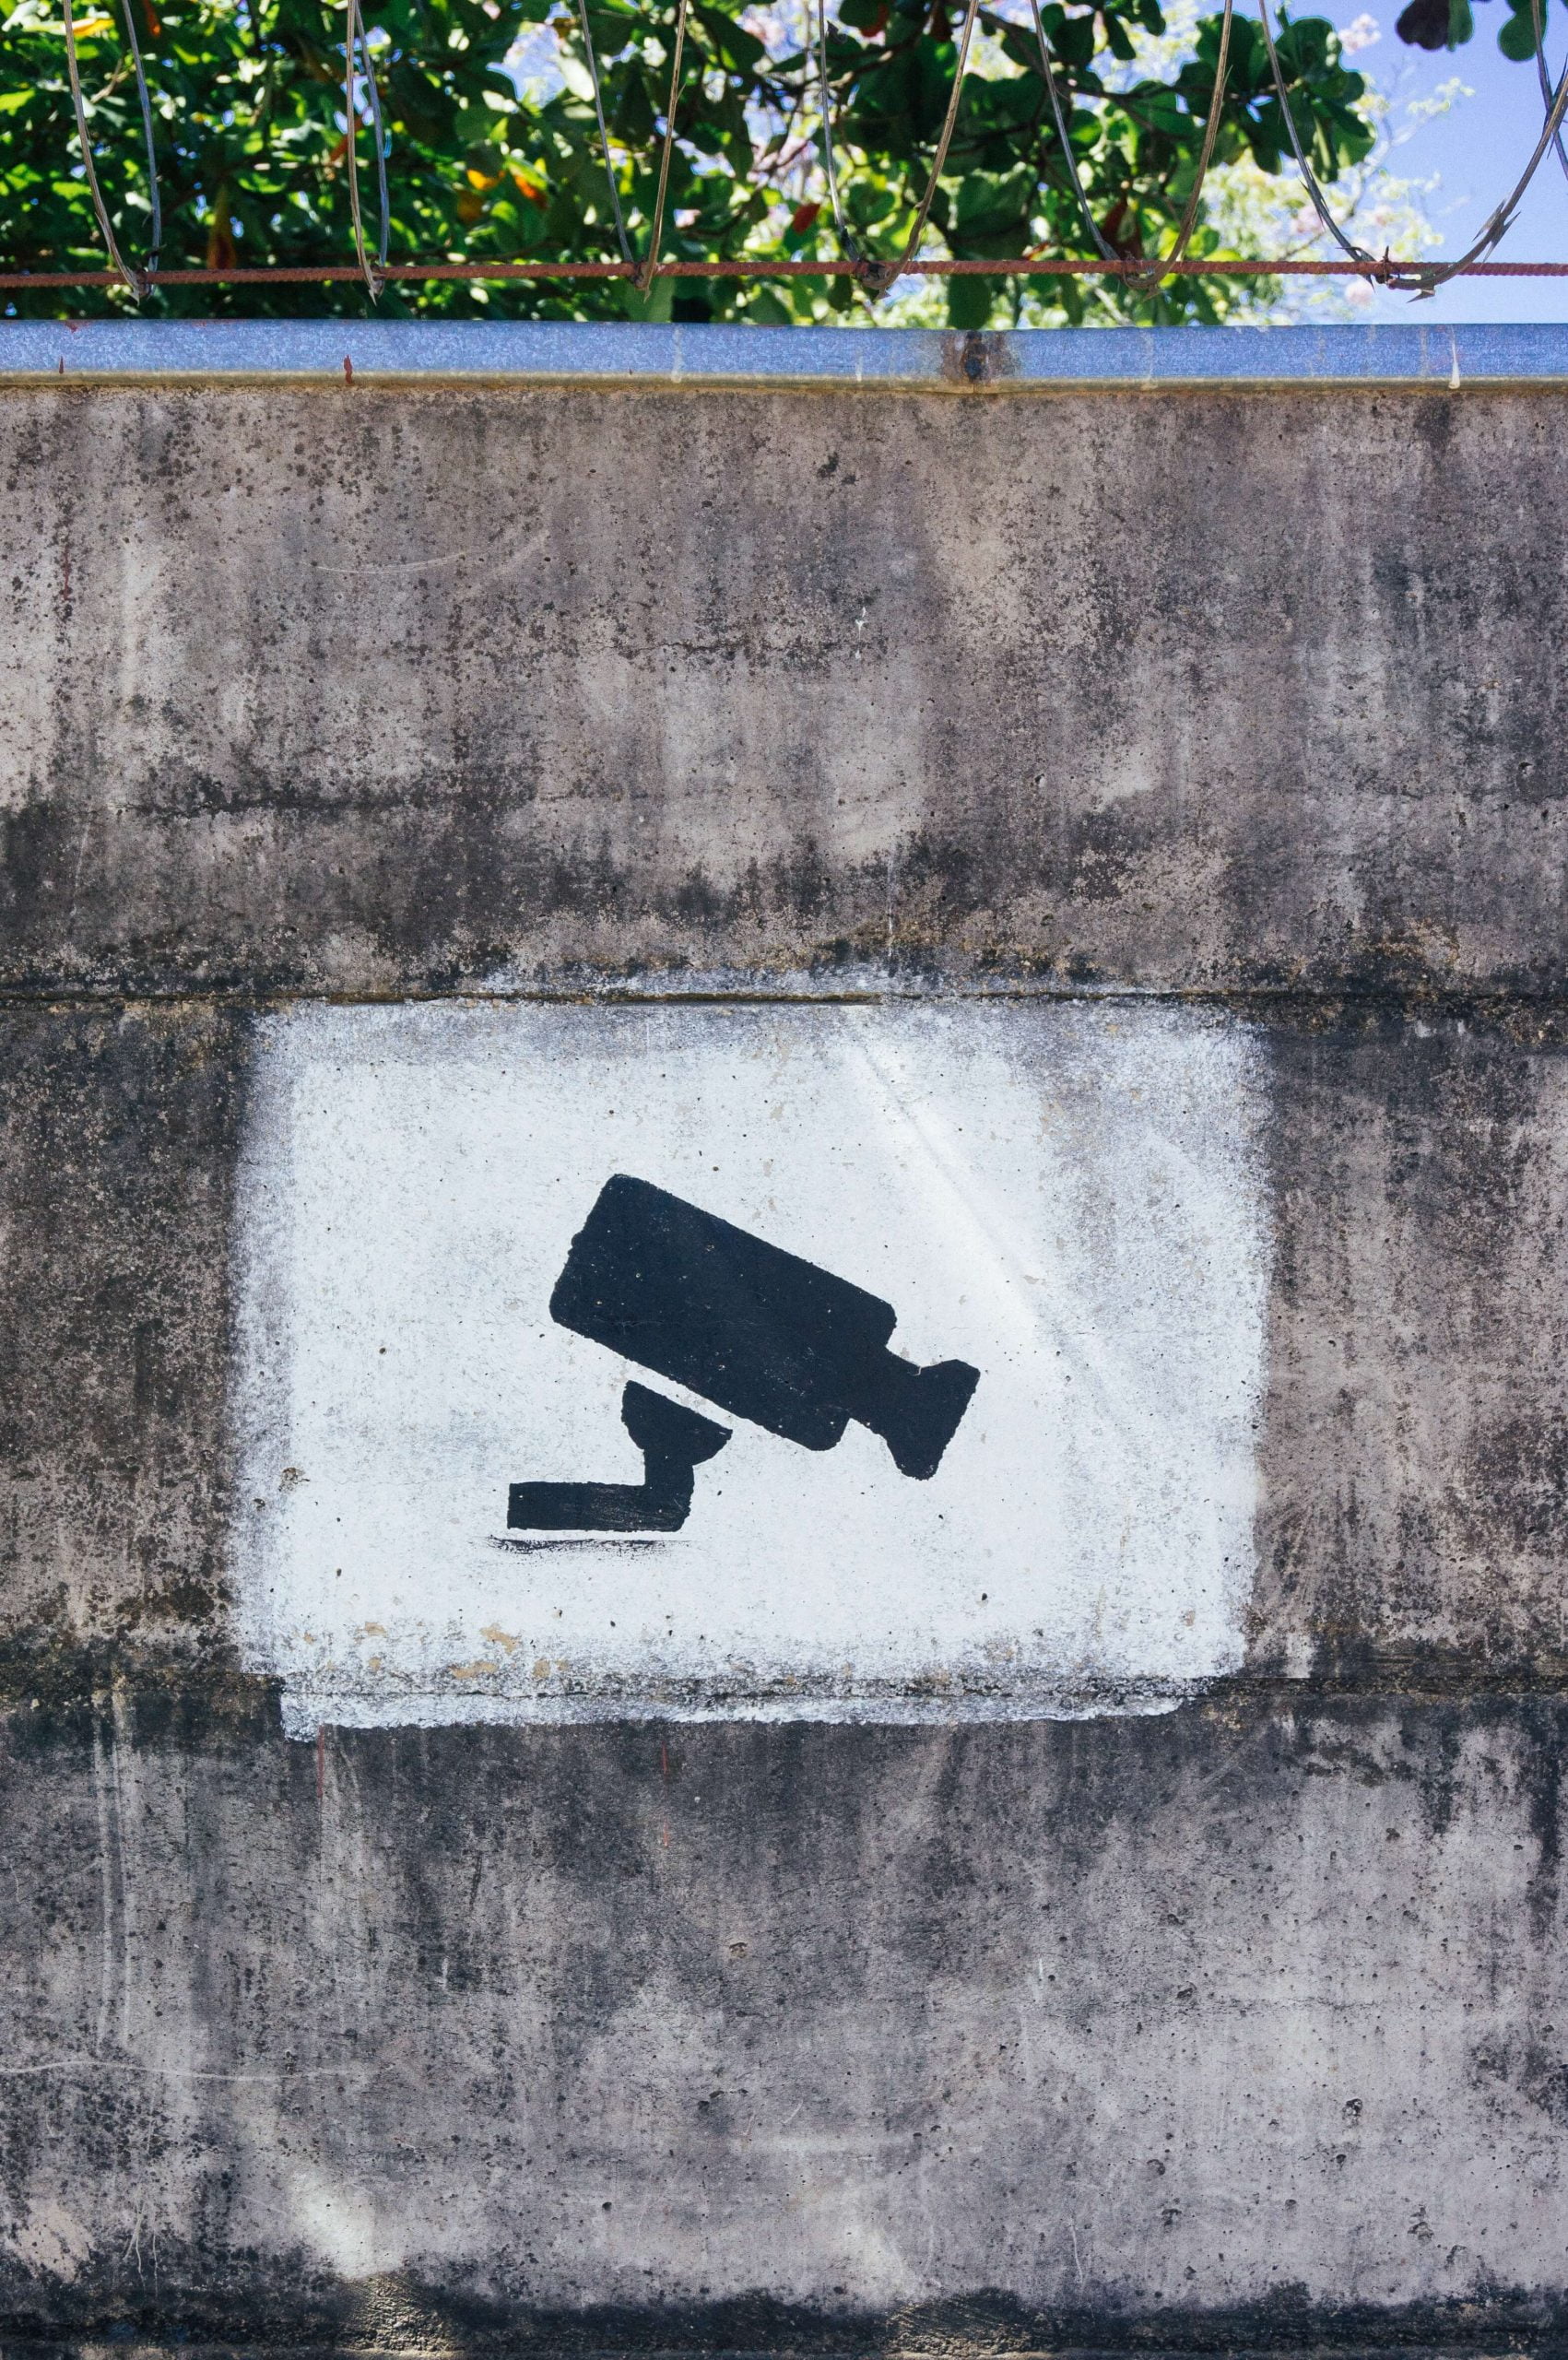 New 2021 FATF Crypto Guidelines Labelled as Mass Warrantless Surveillance